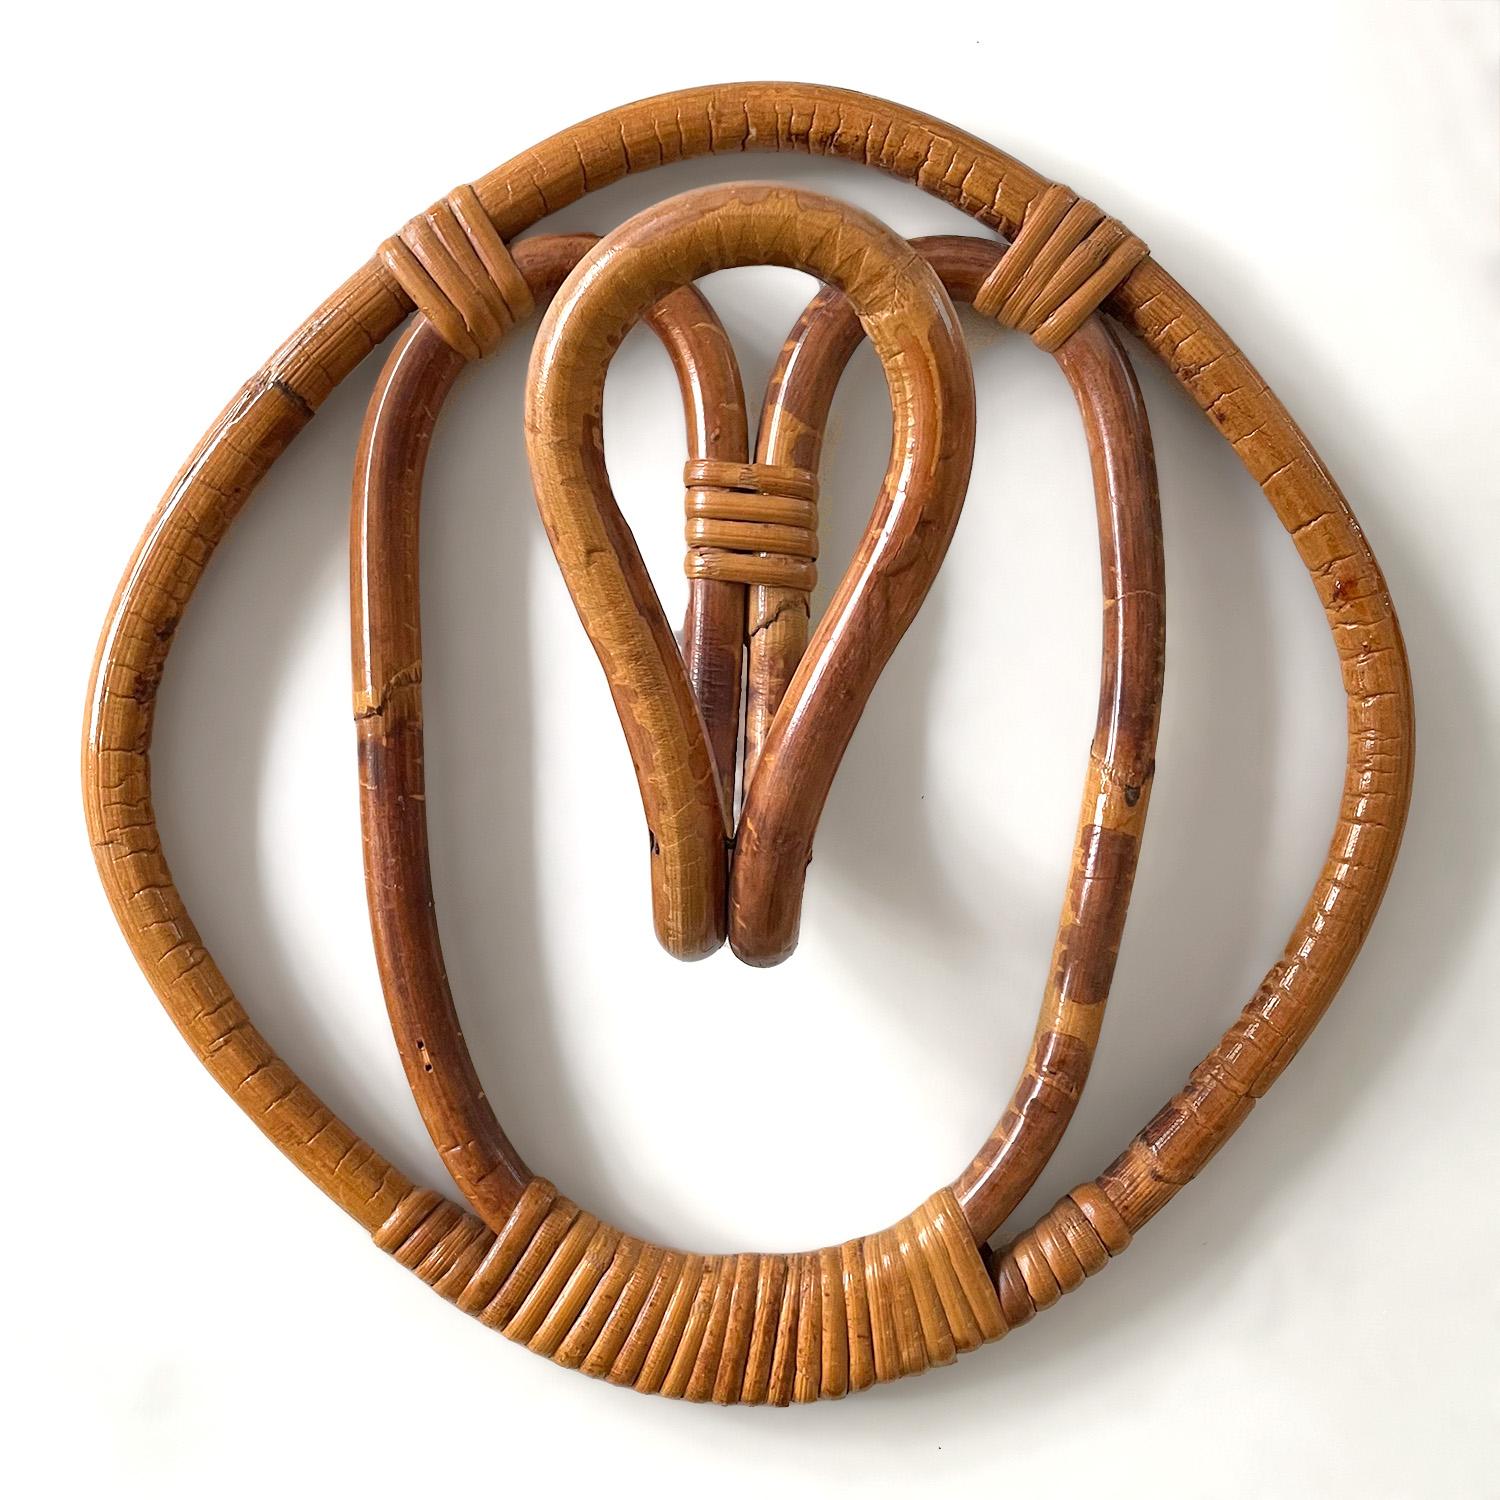 Franco Albini and Franca Helg rattan coat hooks
Produced by Bonacina
Italy, circa 1960's
Beautiful variations in the rattan
Hand woven detail
Sold as a set of 2.